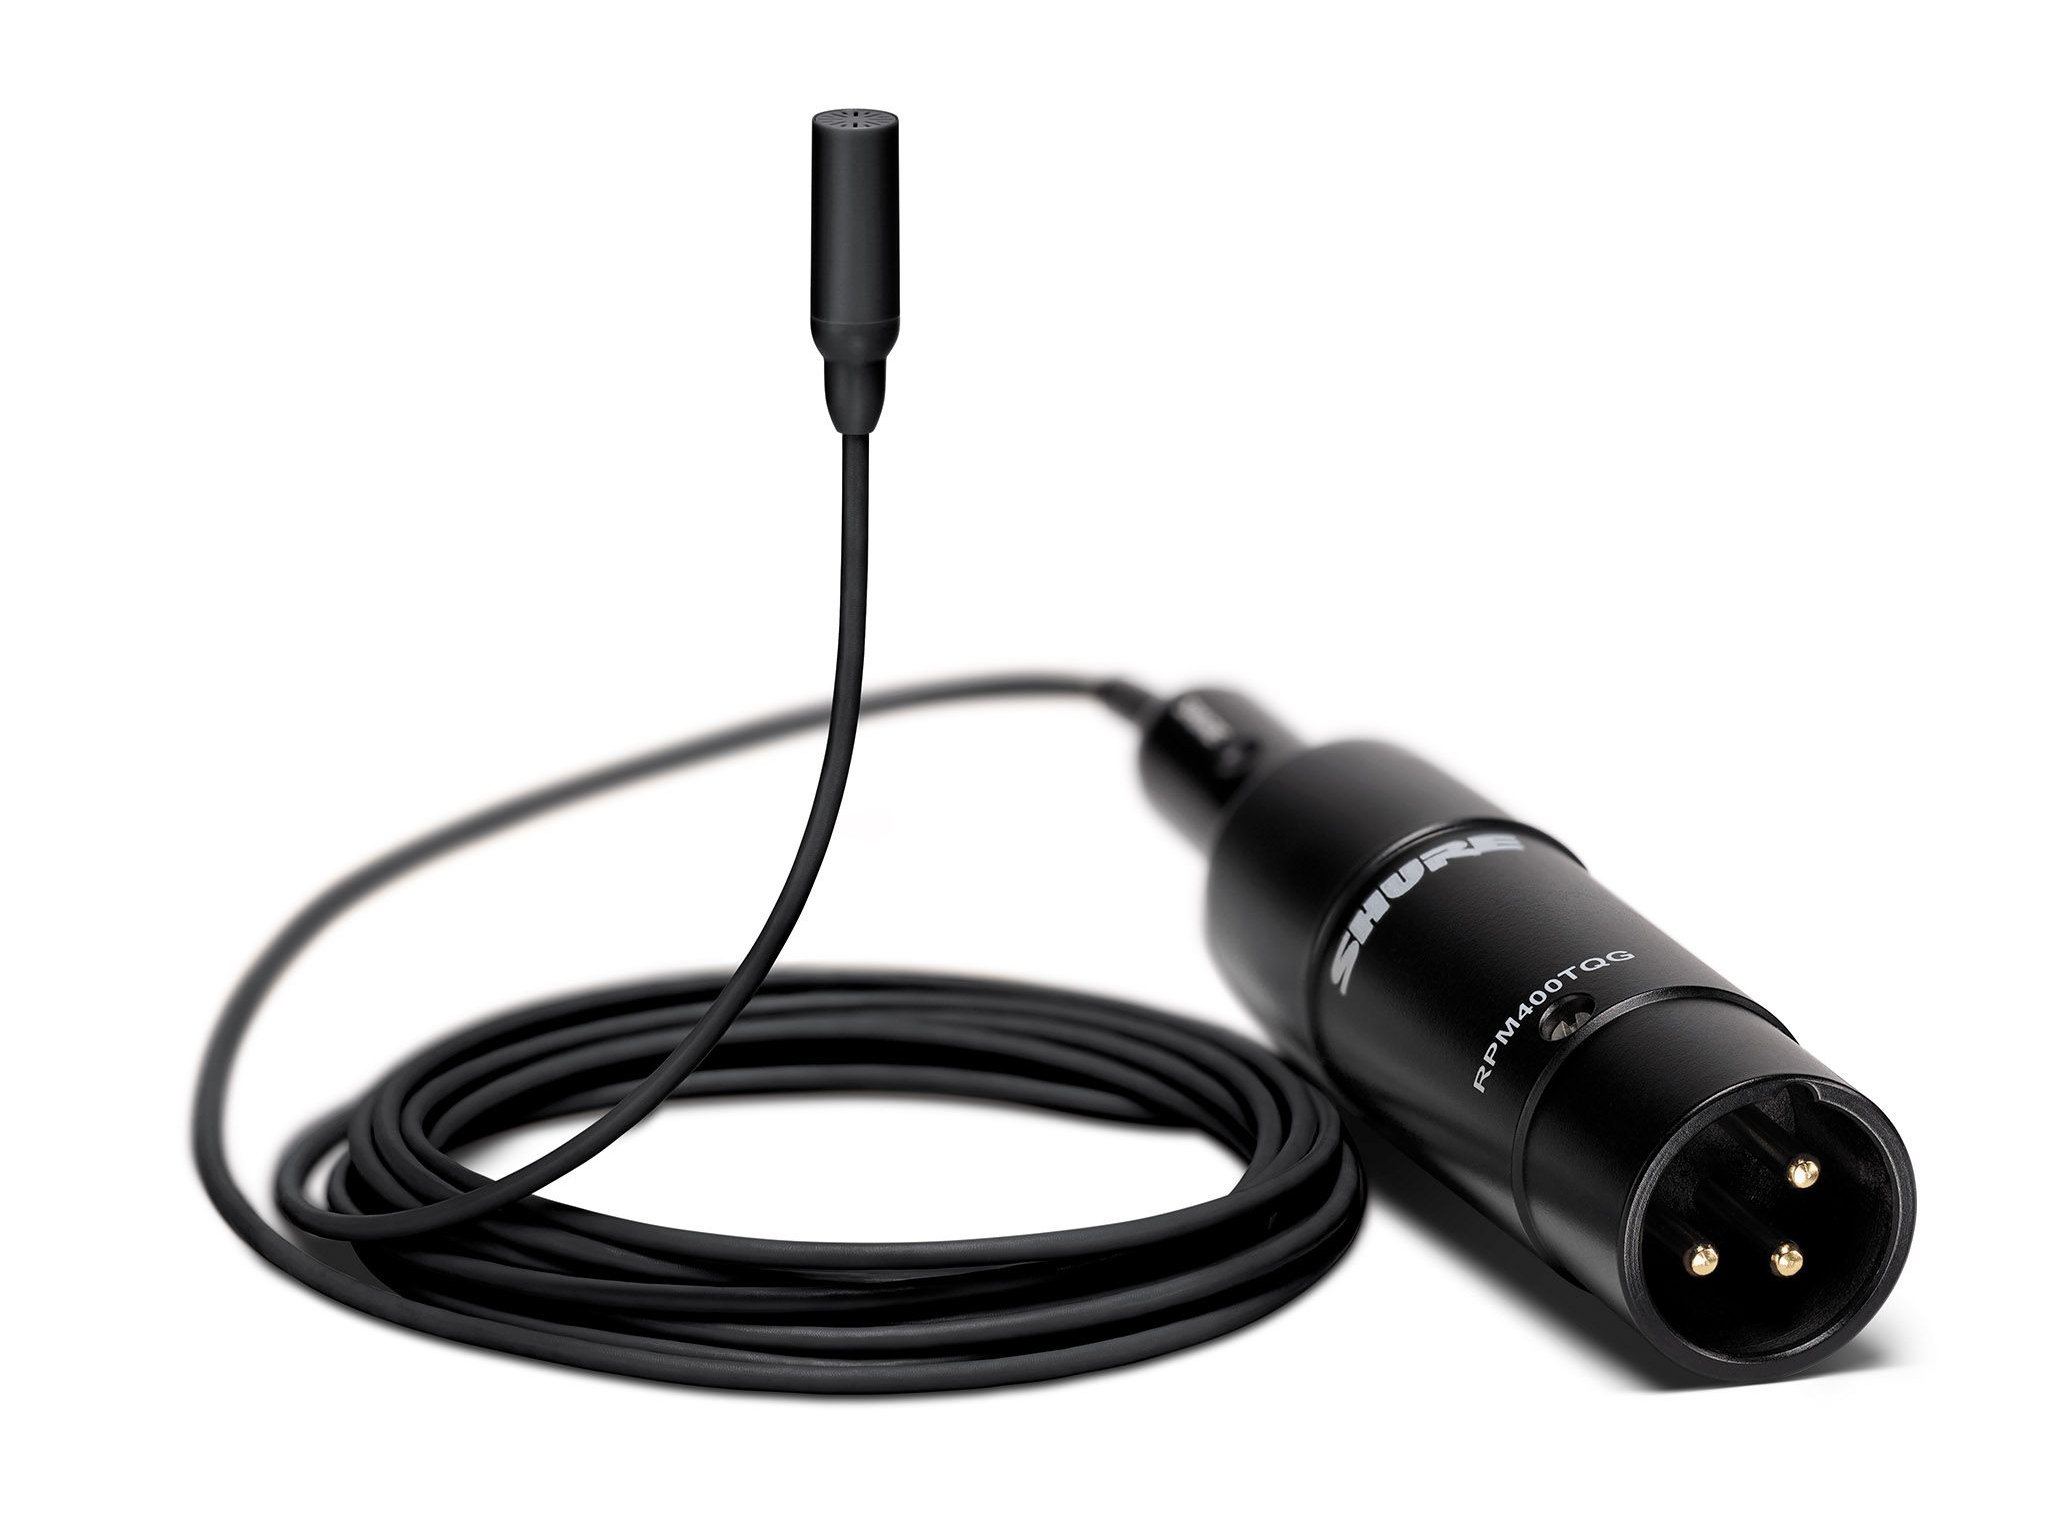 Shure TL48B/O-XLR-A Subminiature Lavalier Microphone With